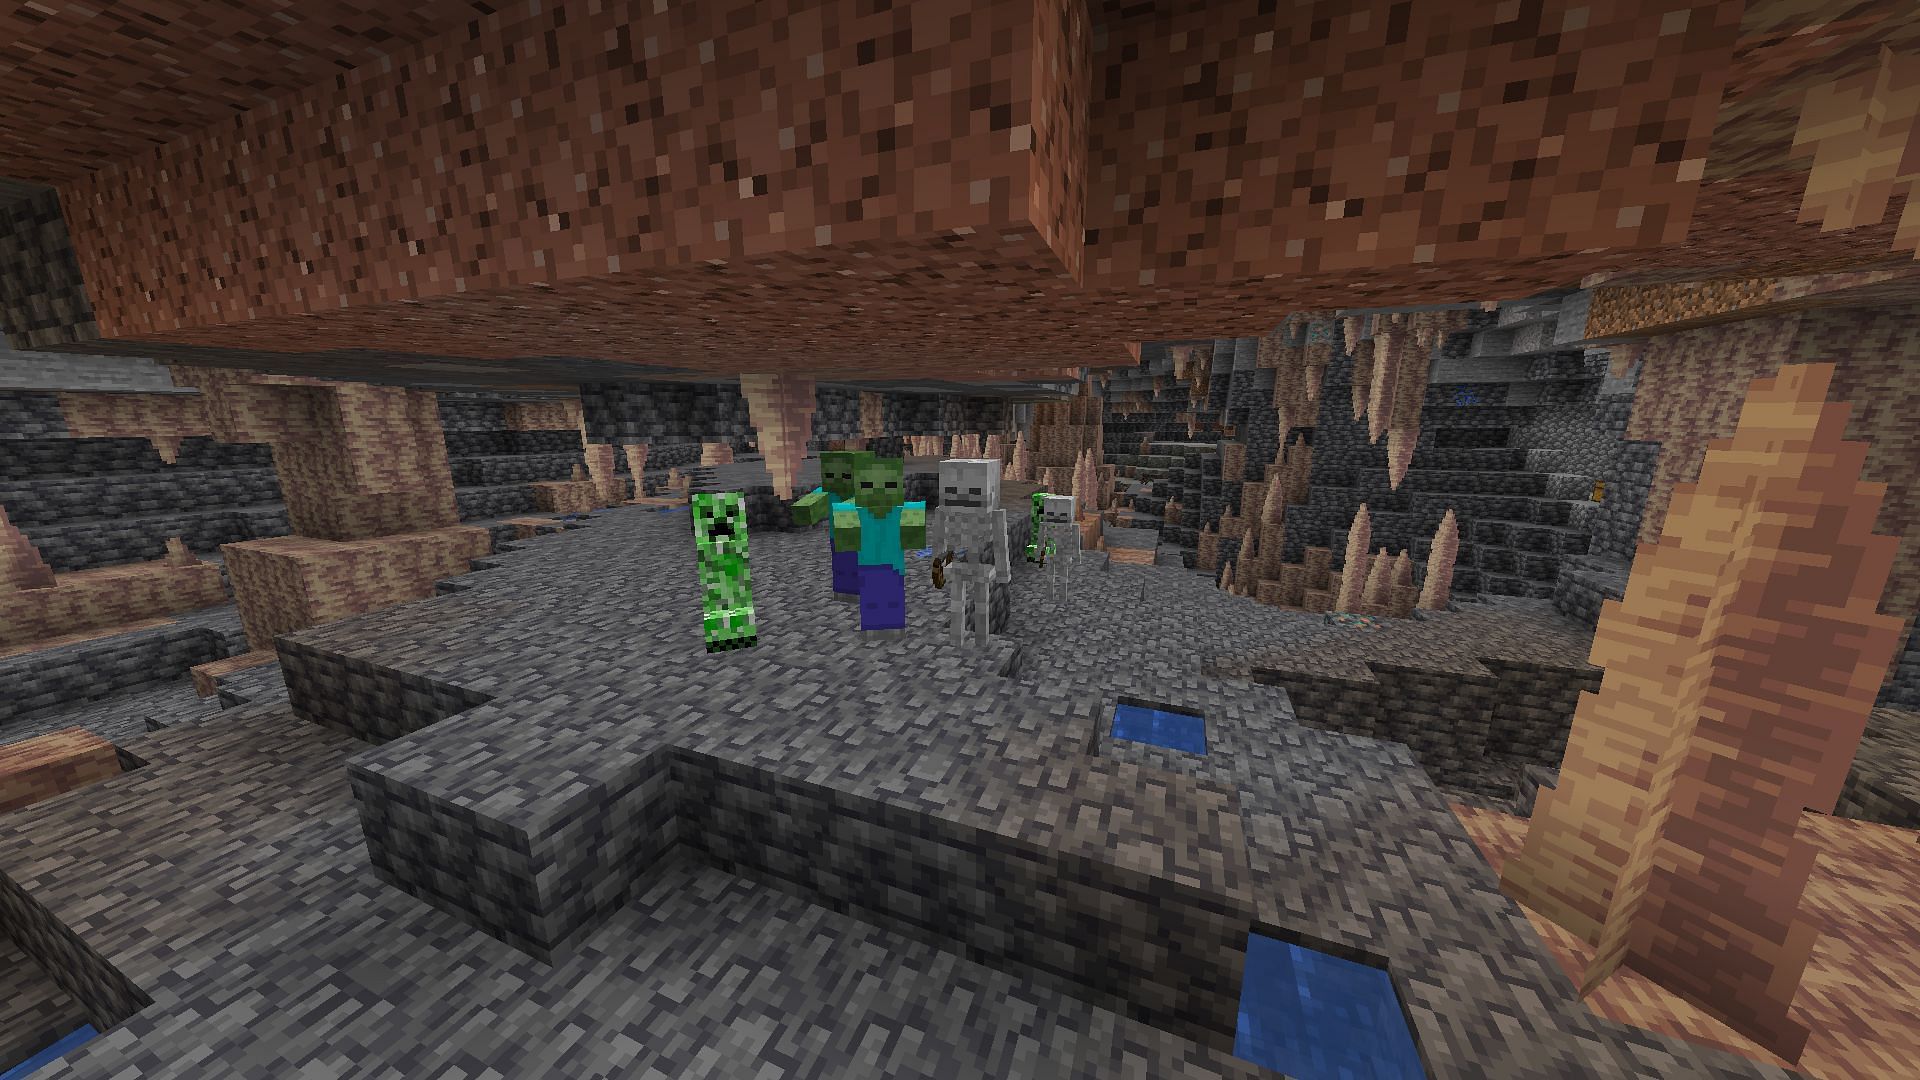 Hostile mobs in a dripstone cave (Image via Minecraft)